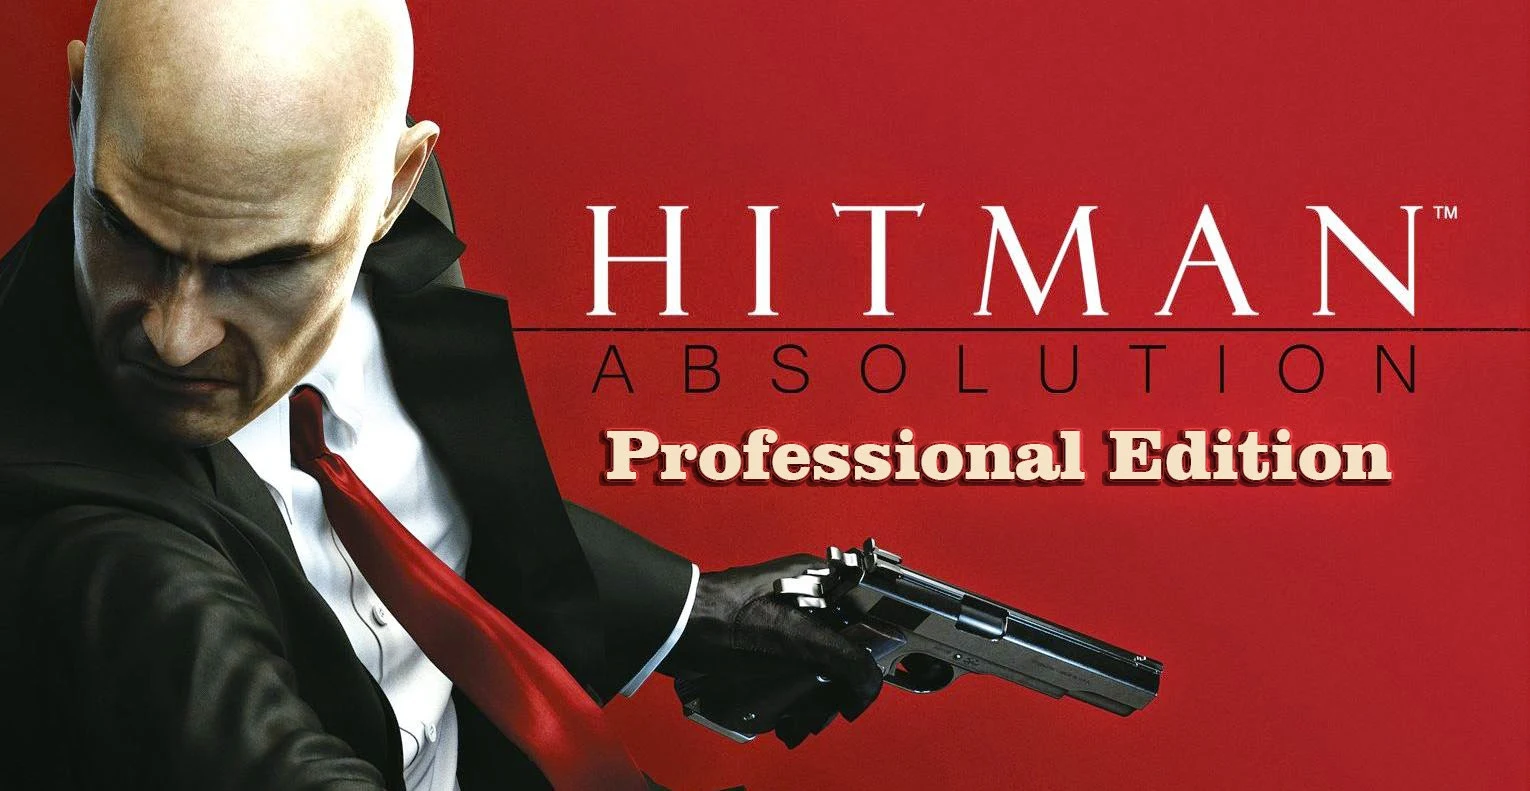 HITMAN ABSOLUTION: PROFESSIONAL EDITION - CRACKED FULL DOWNLOAD